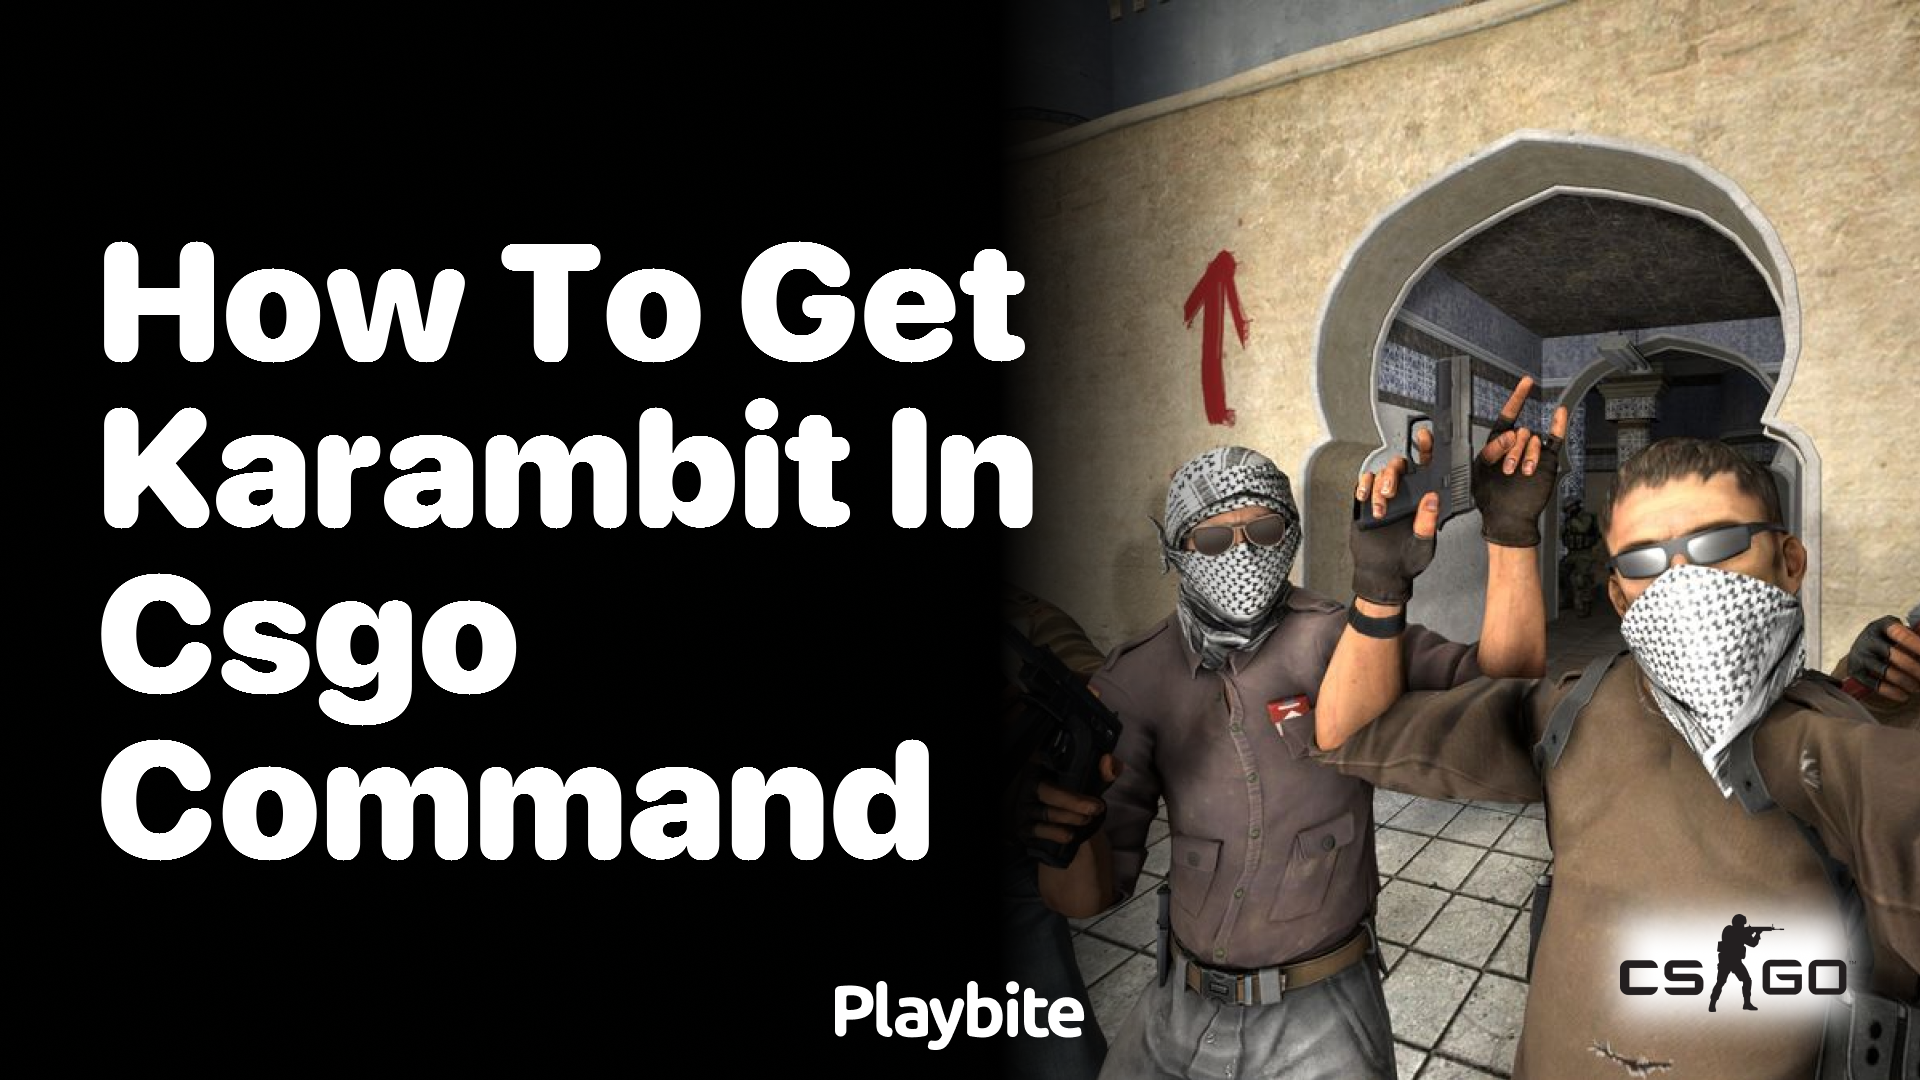 How to get a Karambit in CS:GO with commands